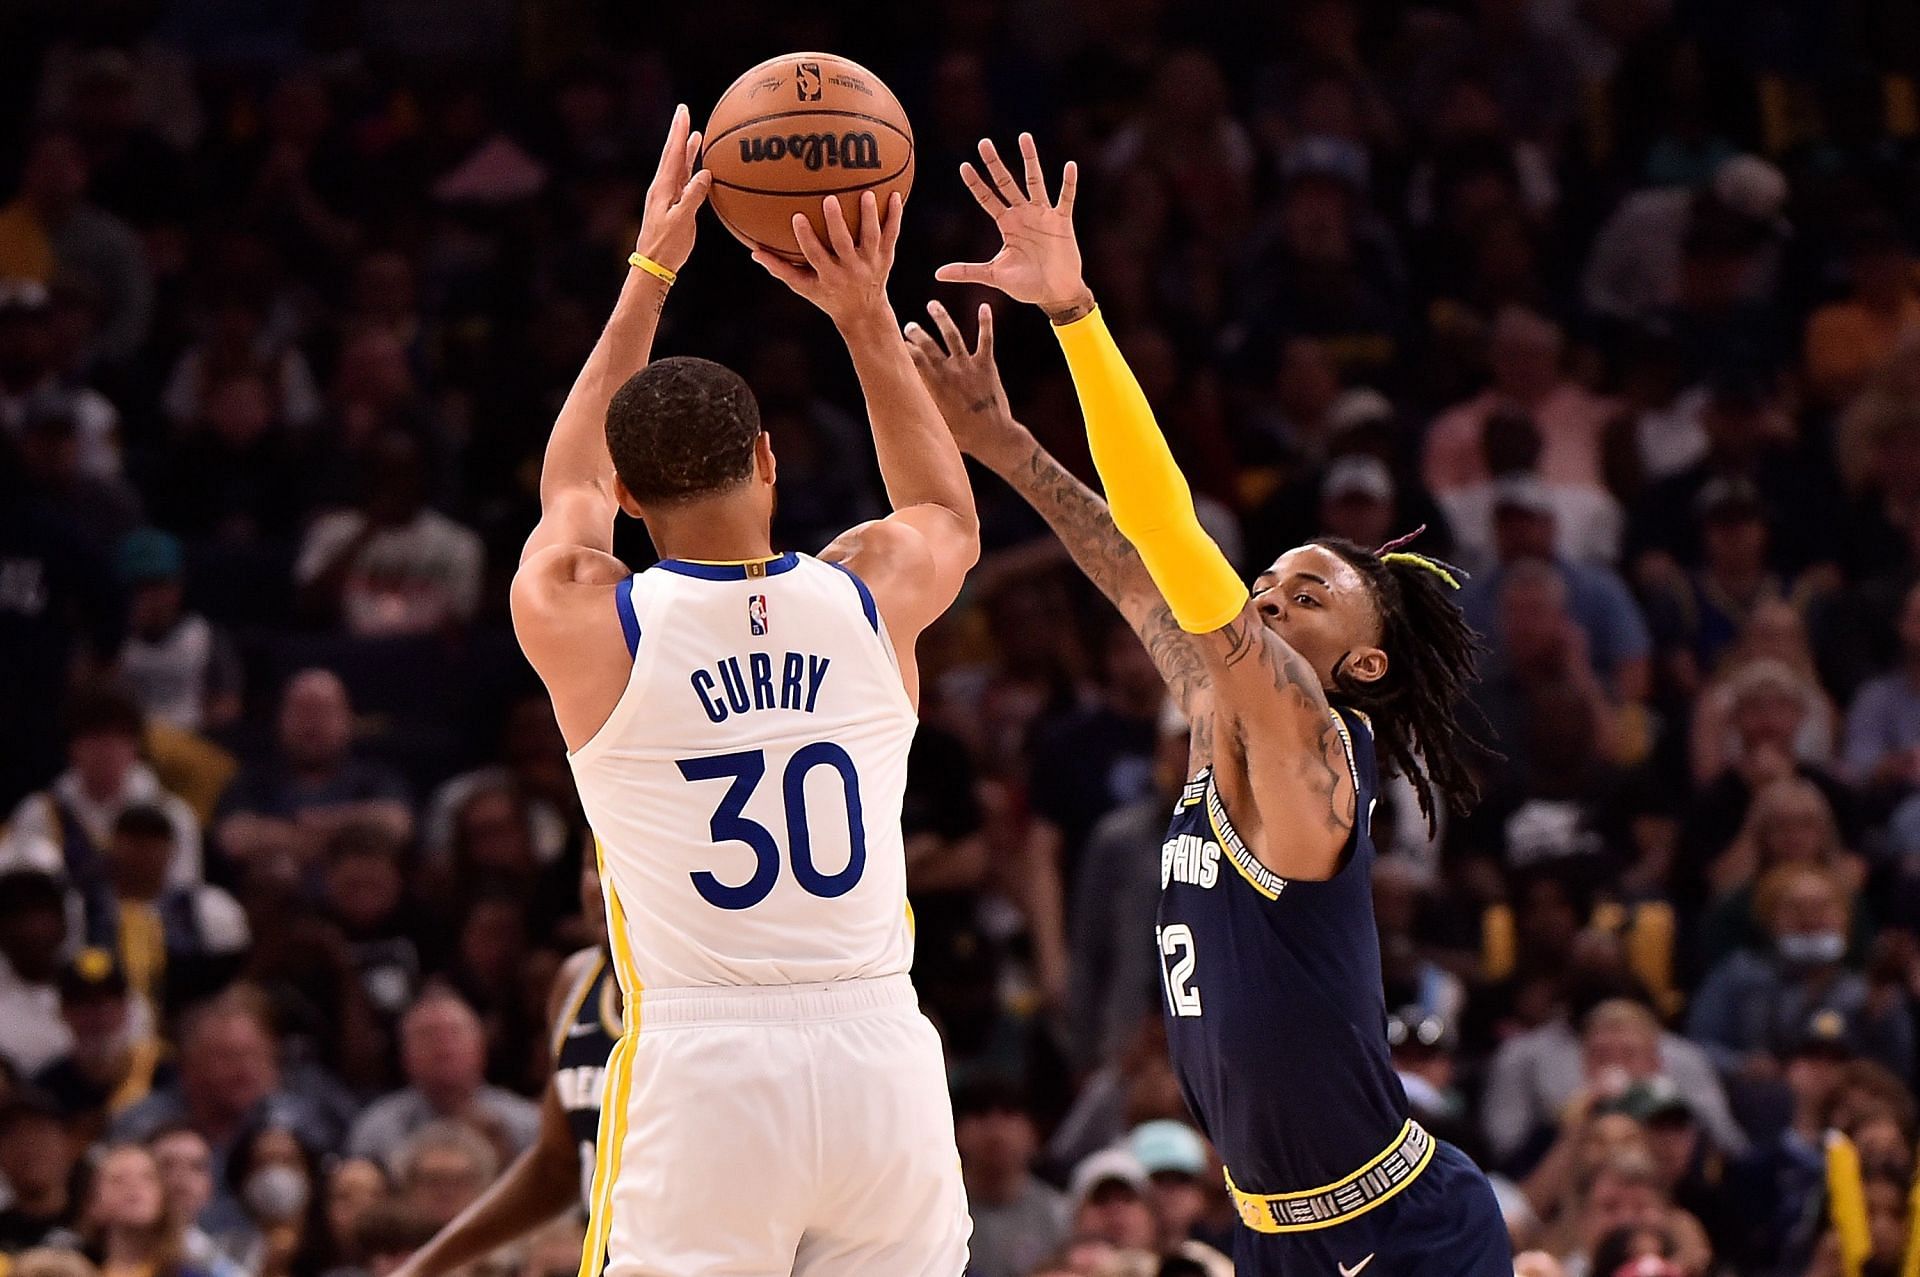 Steph Curry of the Golden State Warriors shoots over Ja Morant of the Memphis Grizzlies